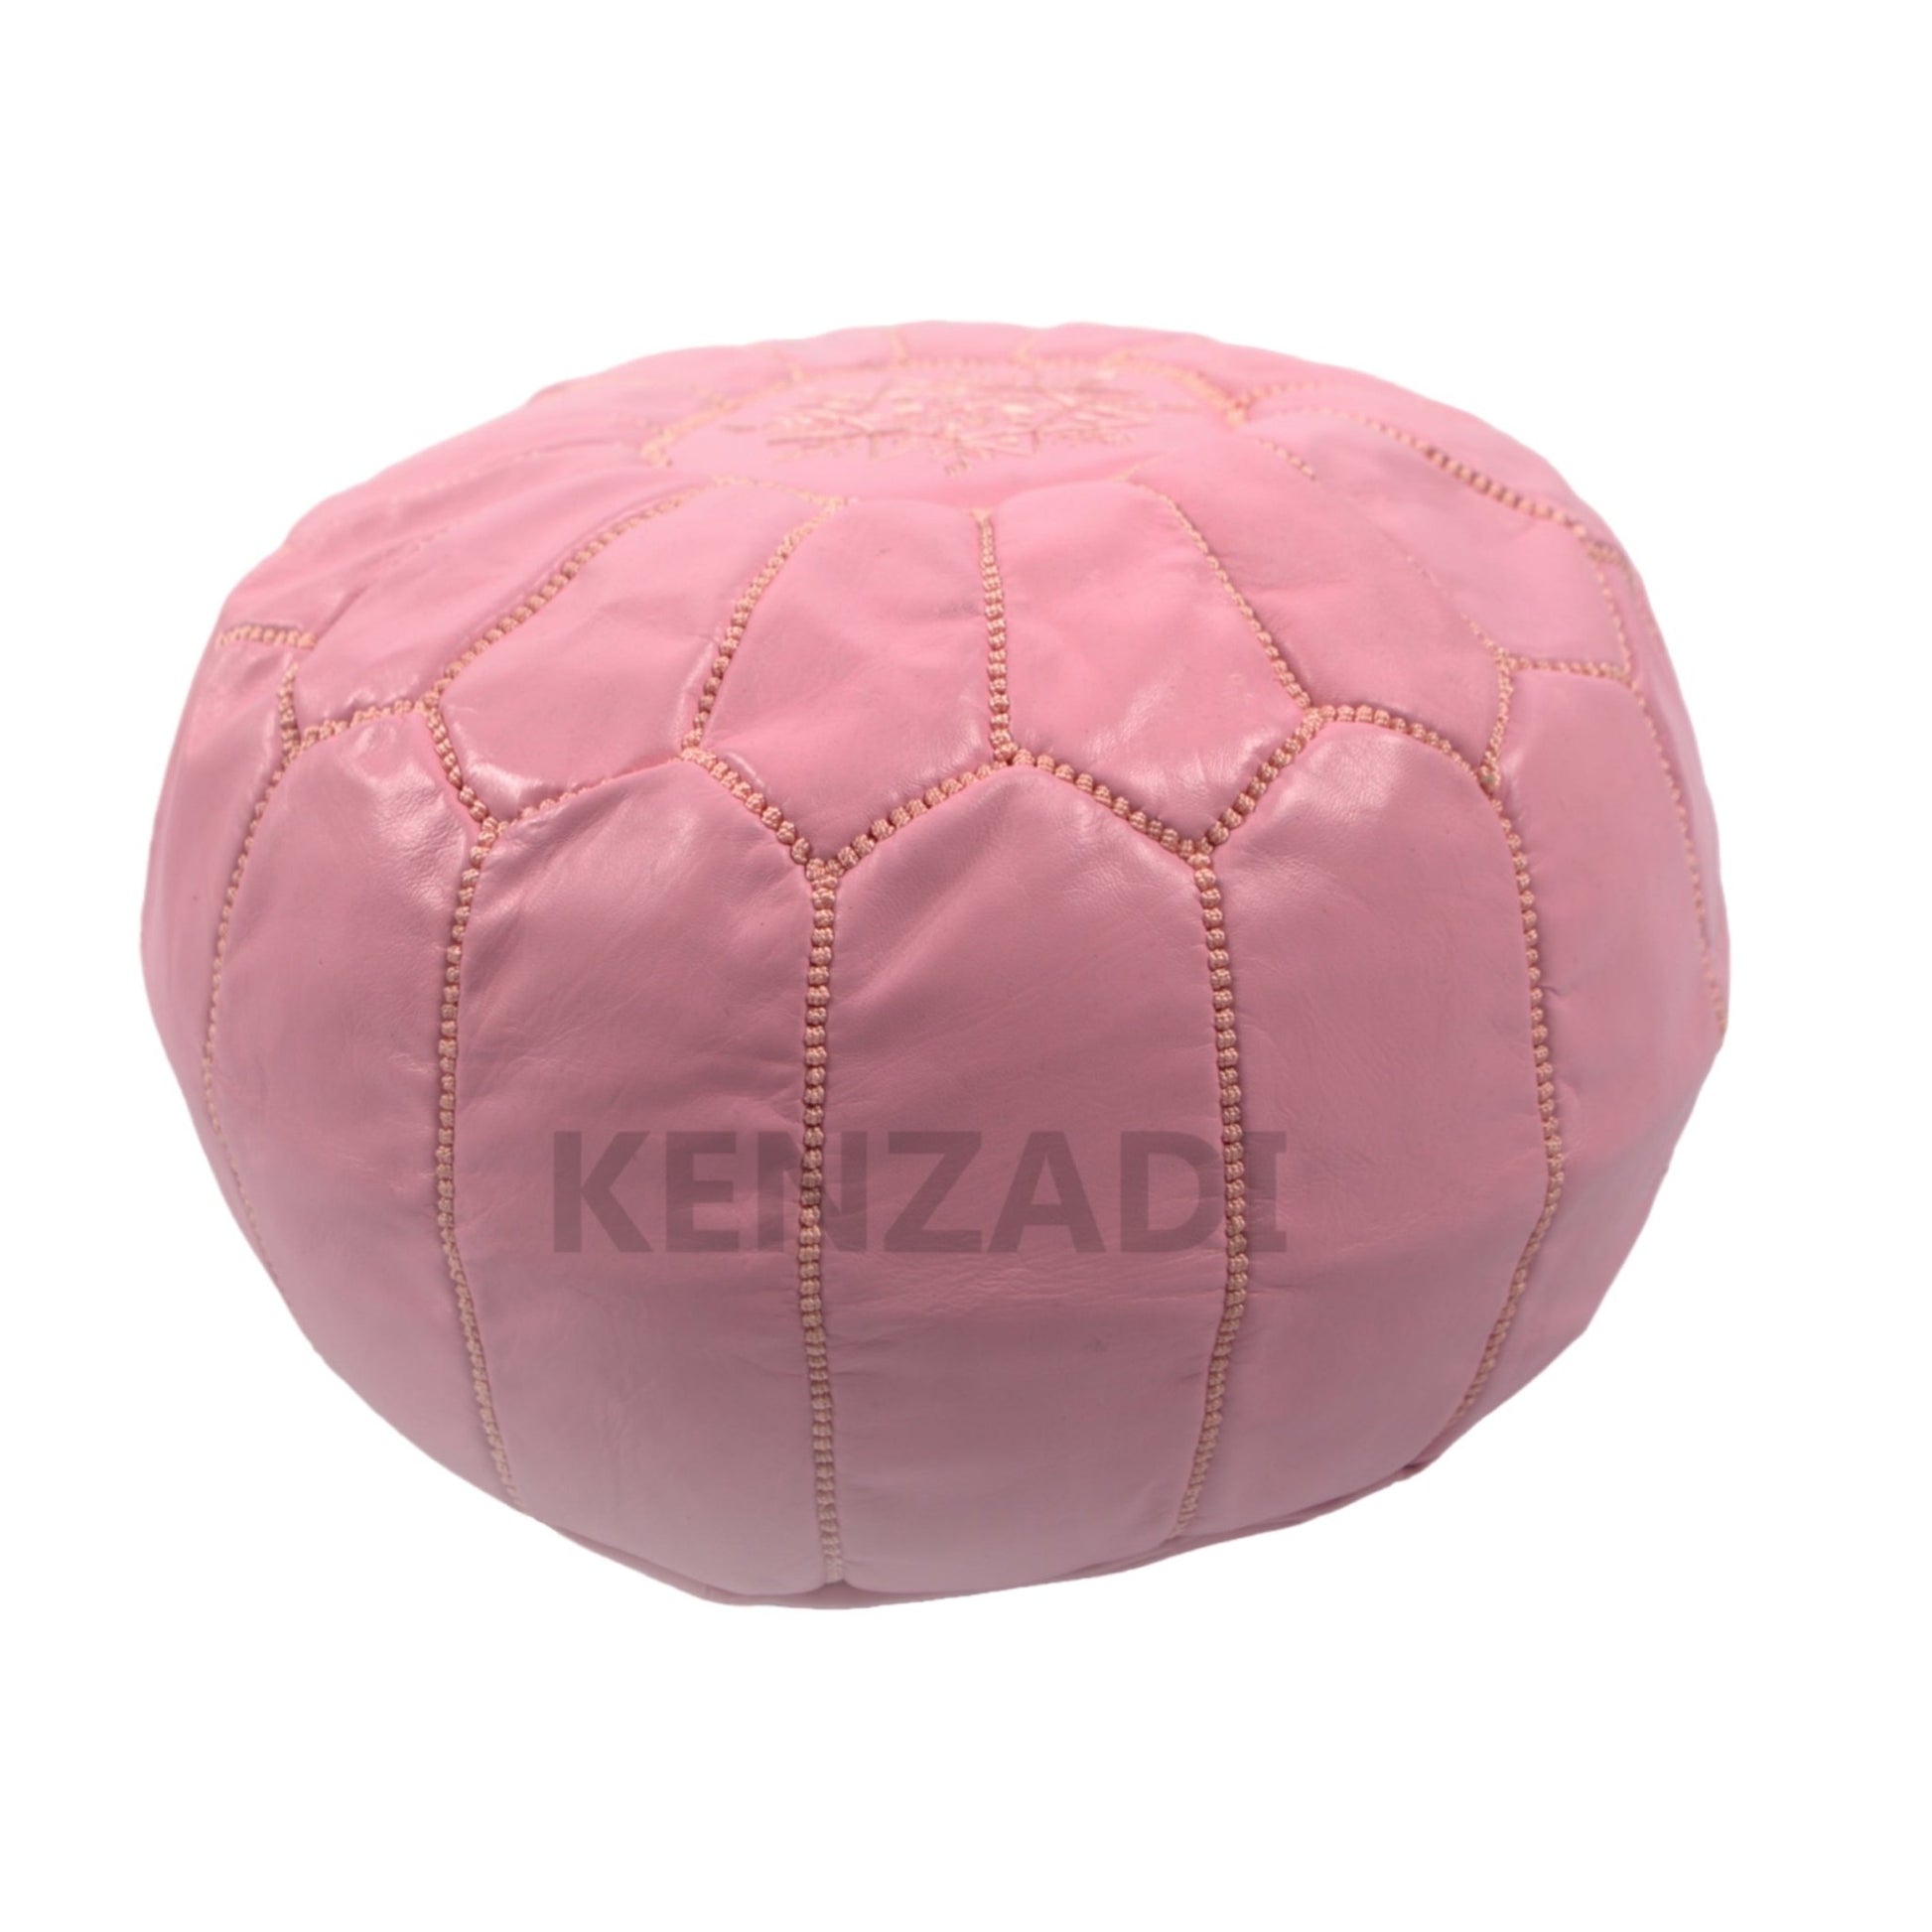 Moroccan leather pouf, round pouf, berber pouf, Light Pink with Pink embroidery by Kenzadi - Handmade by My Poufs